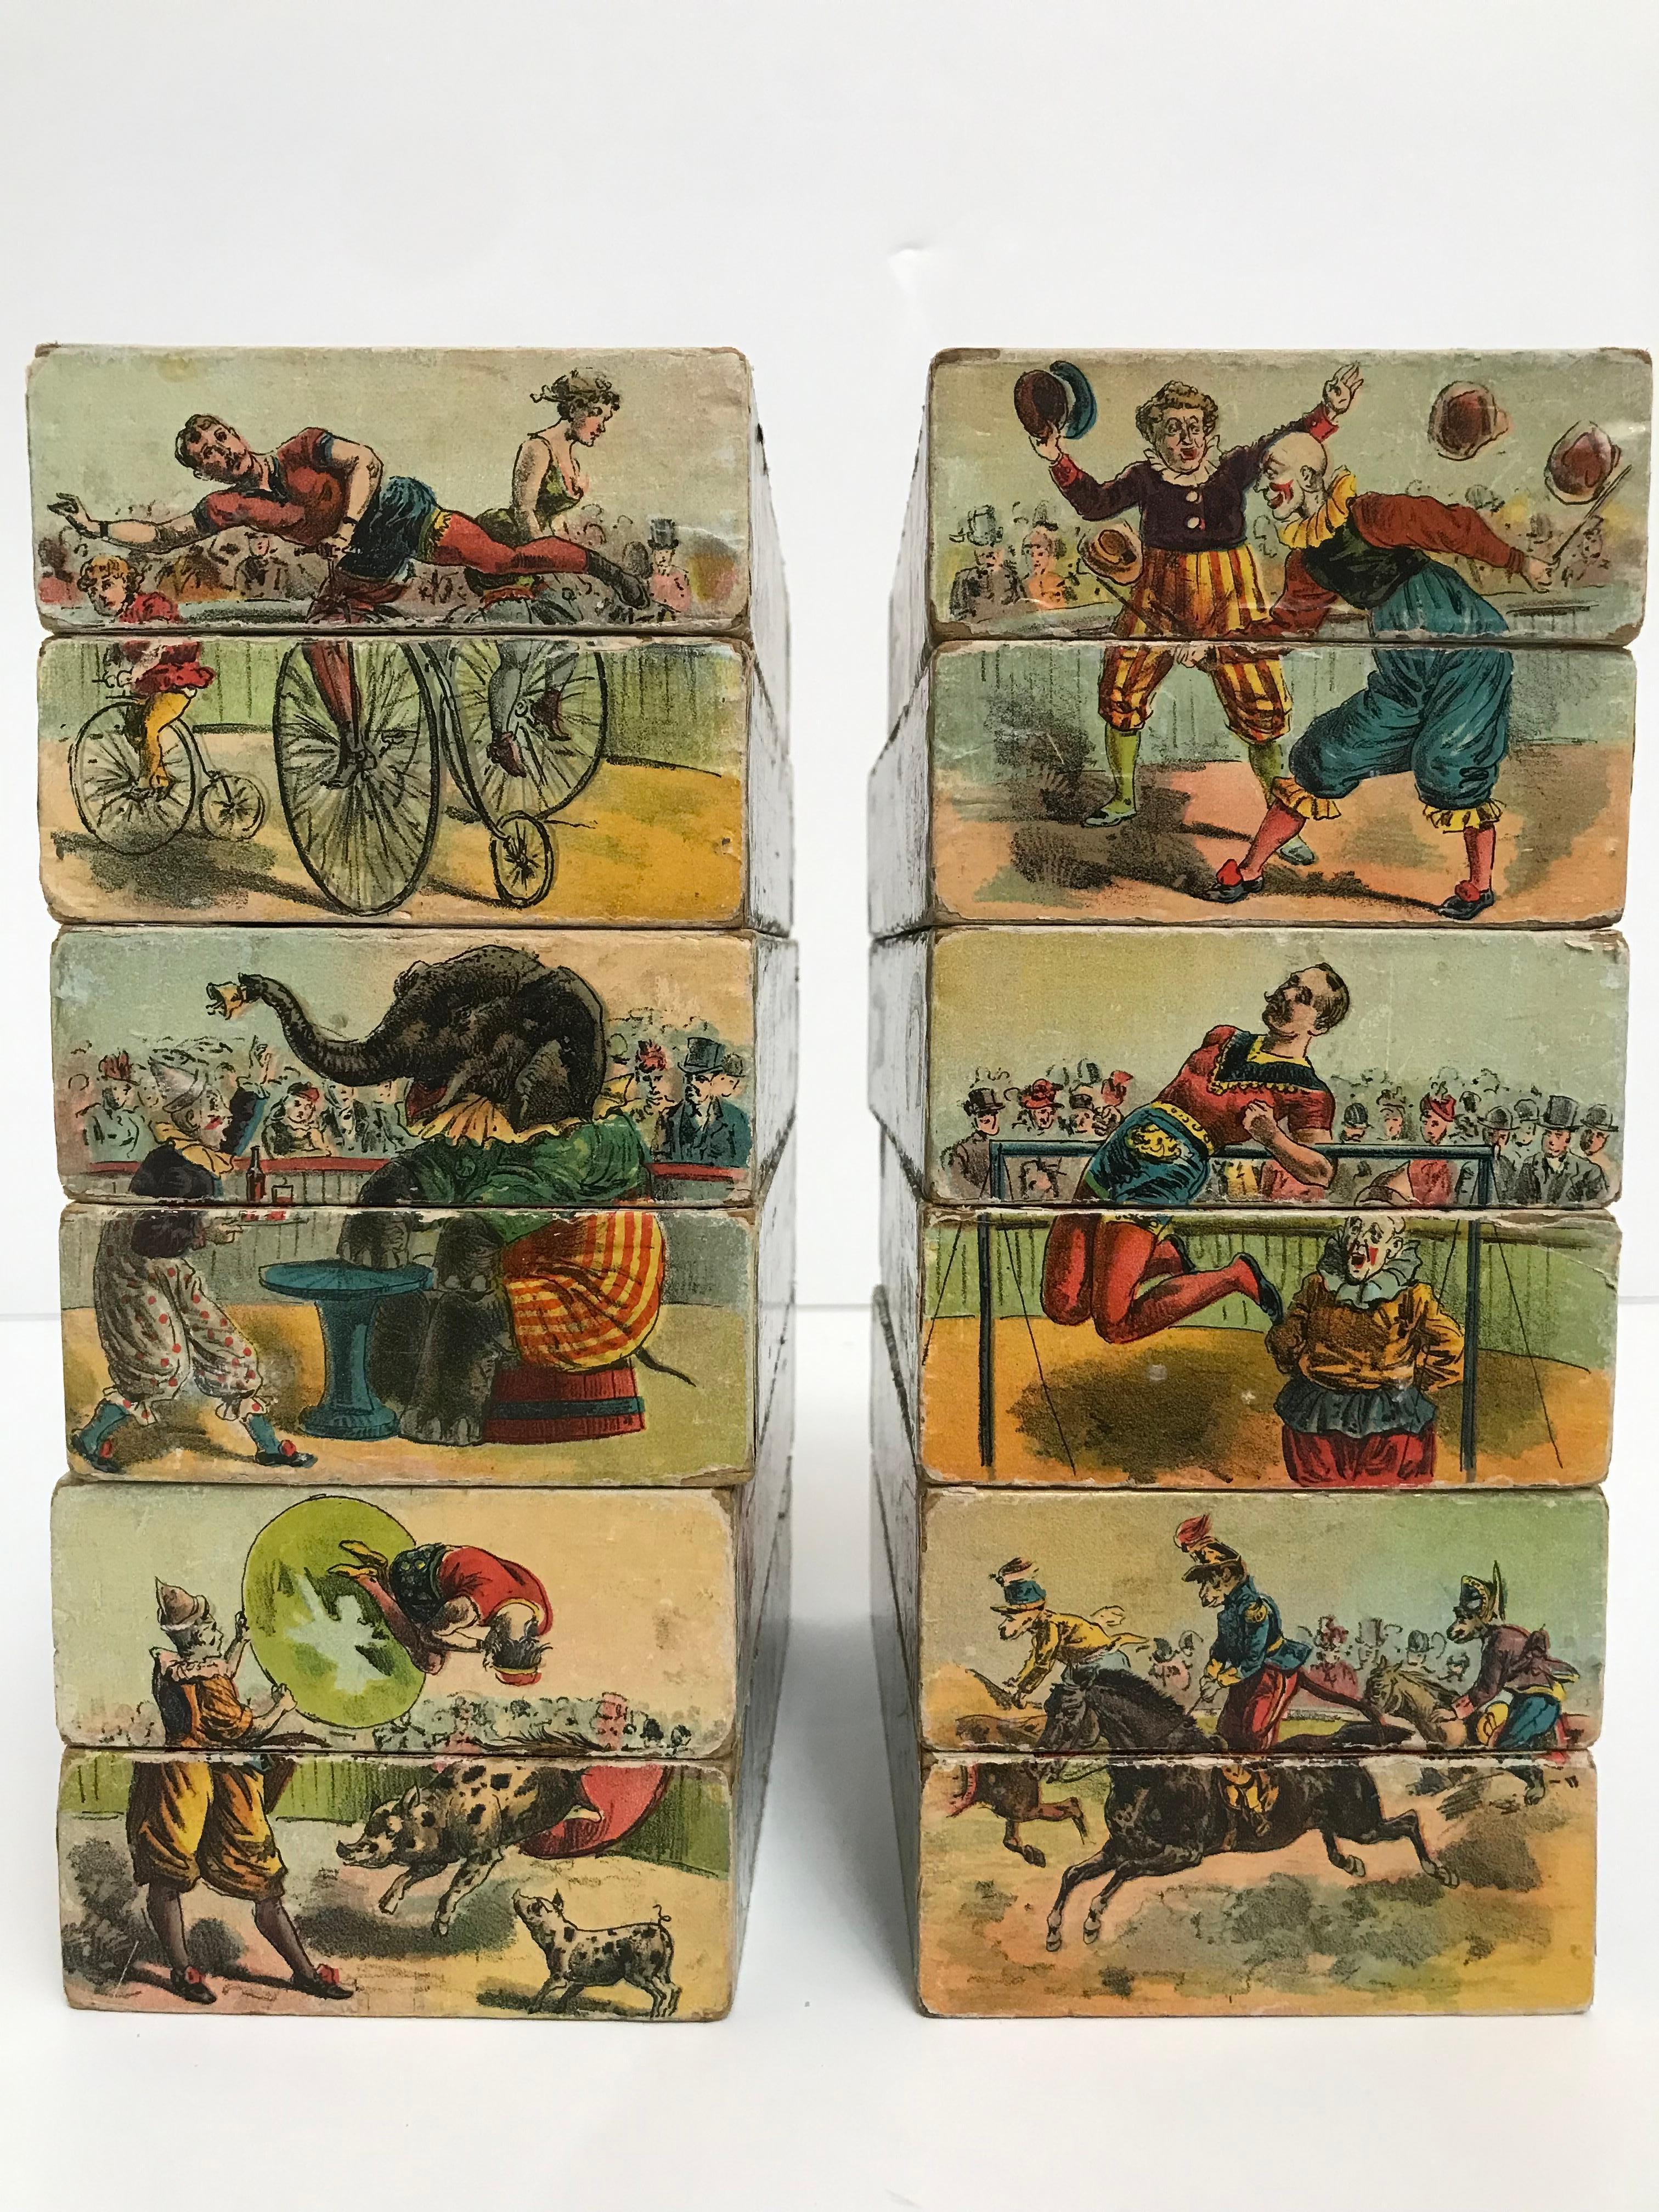 A Large Complete 1890's Set of McLoughlin Bros Picture Blocks with Storage Box 7